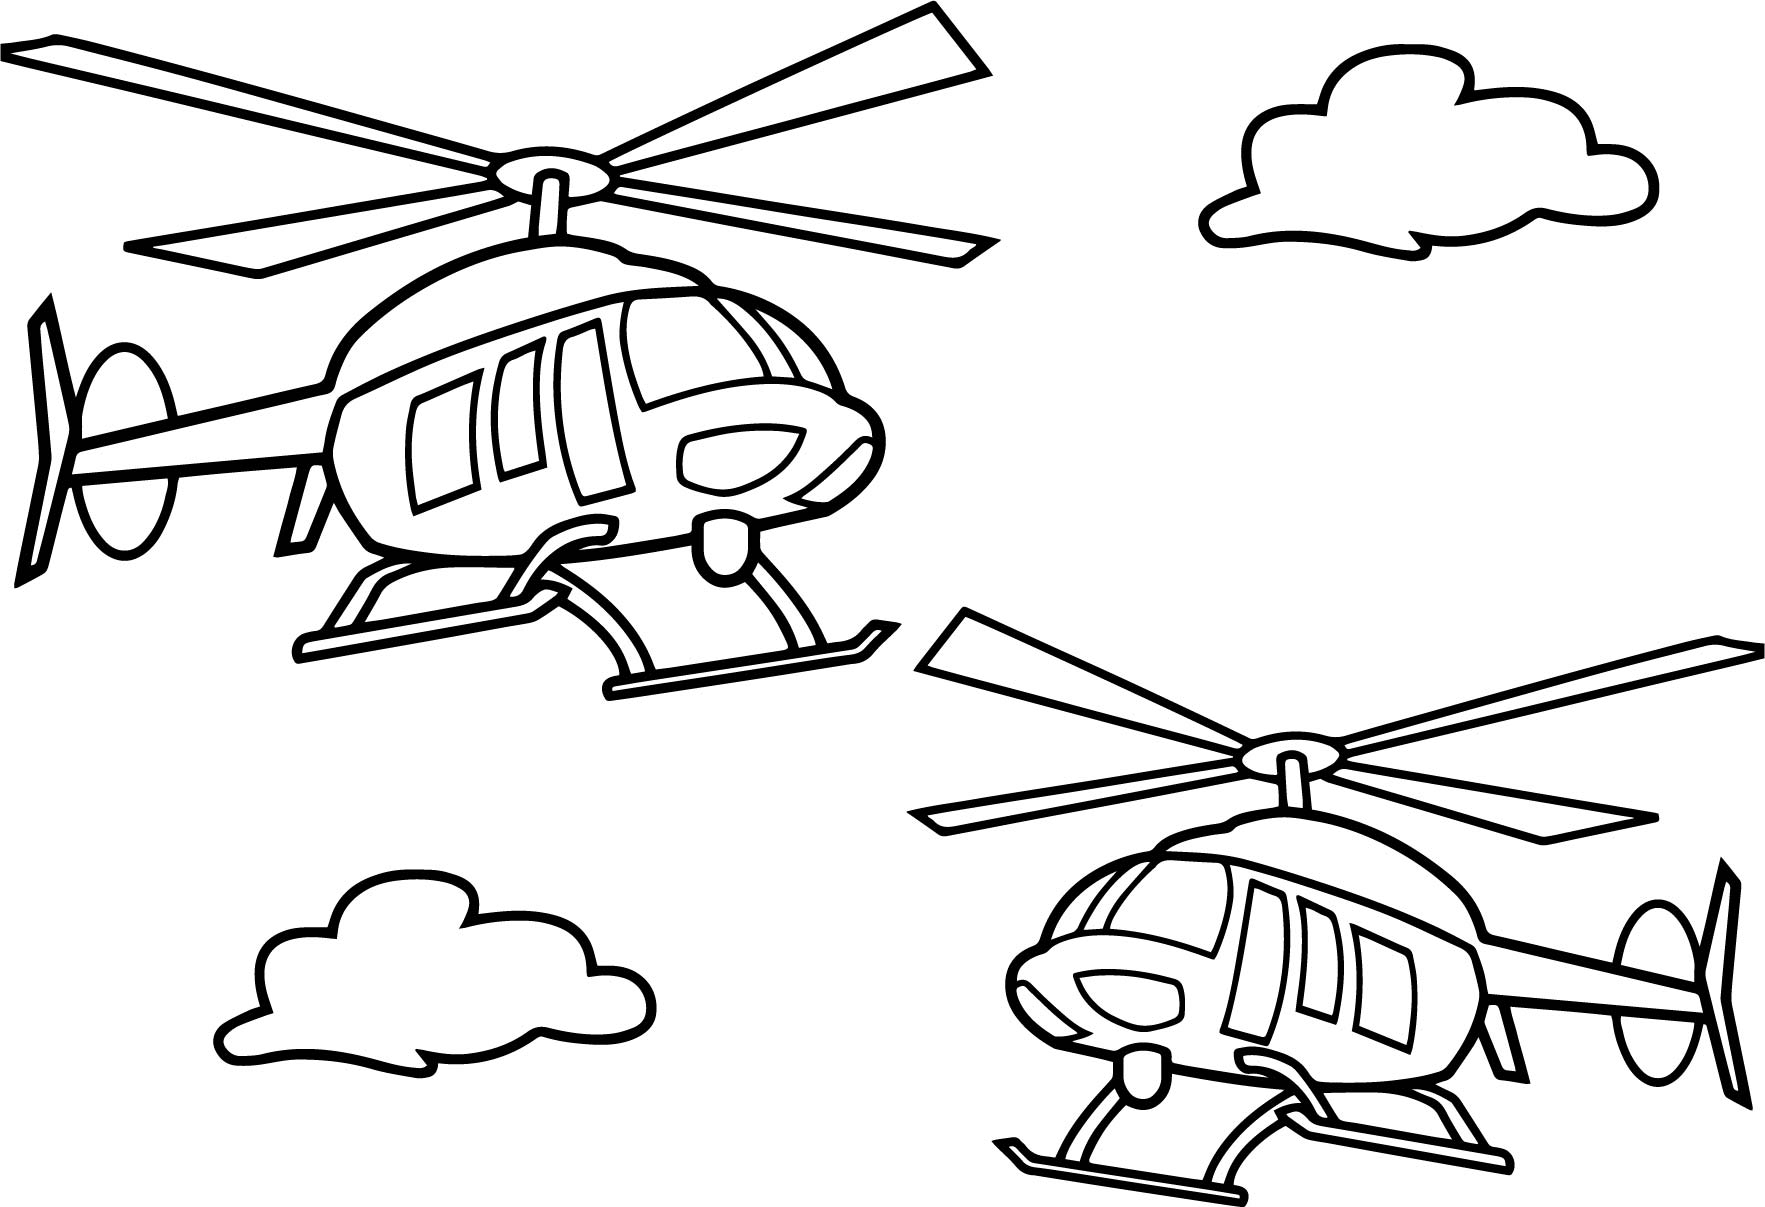 Helicopter Line Drawing at GetDrawings Free download